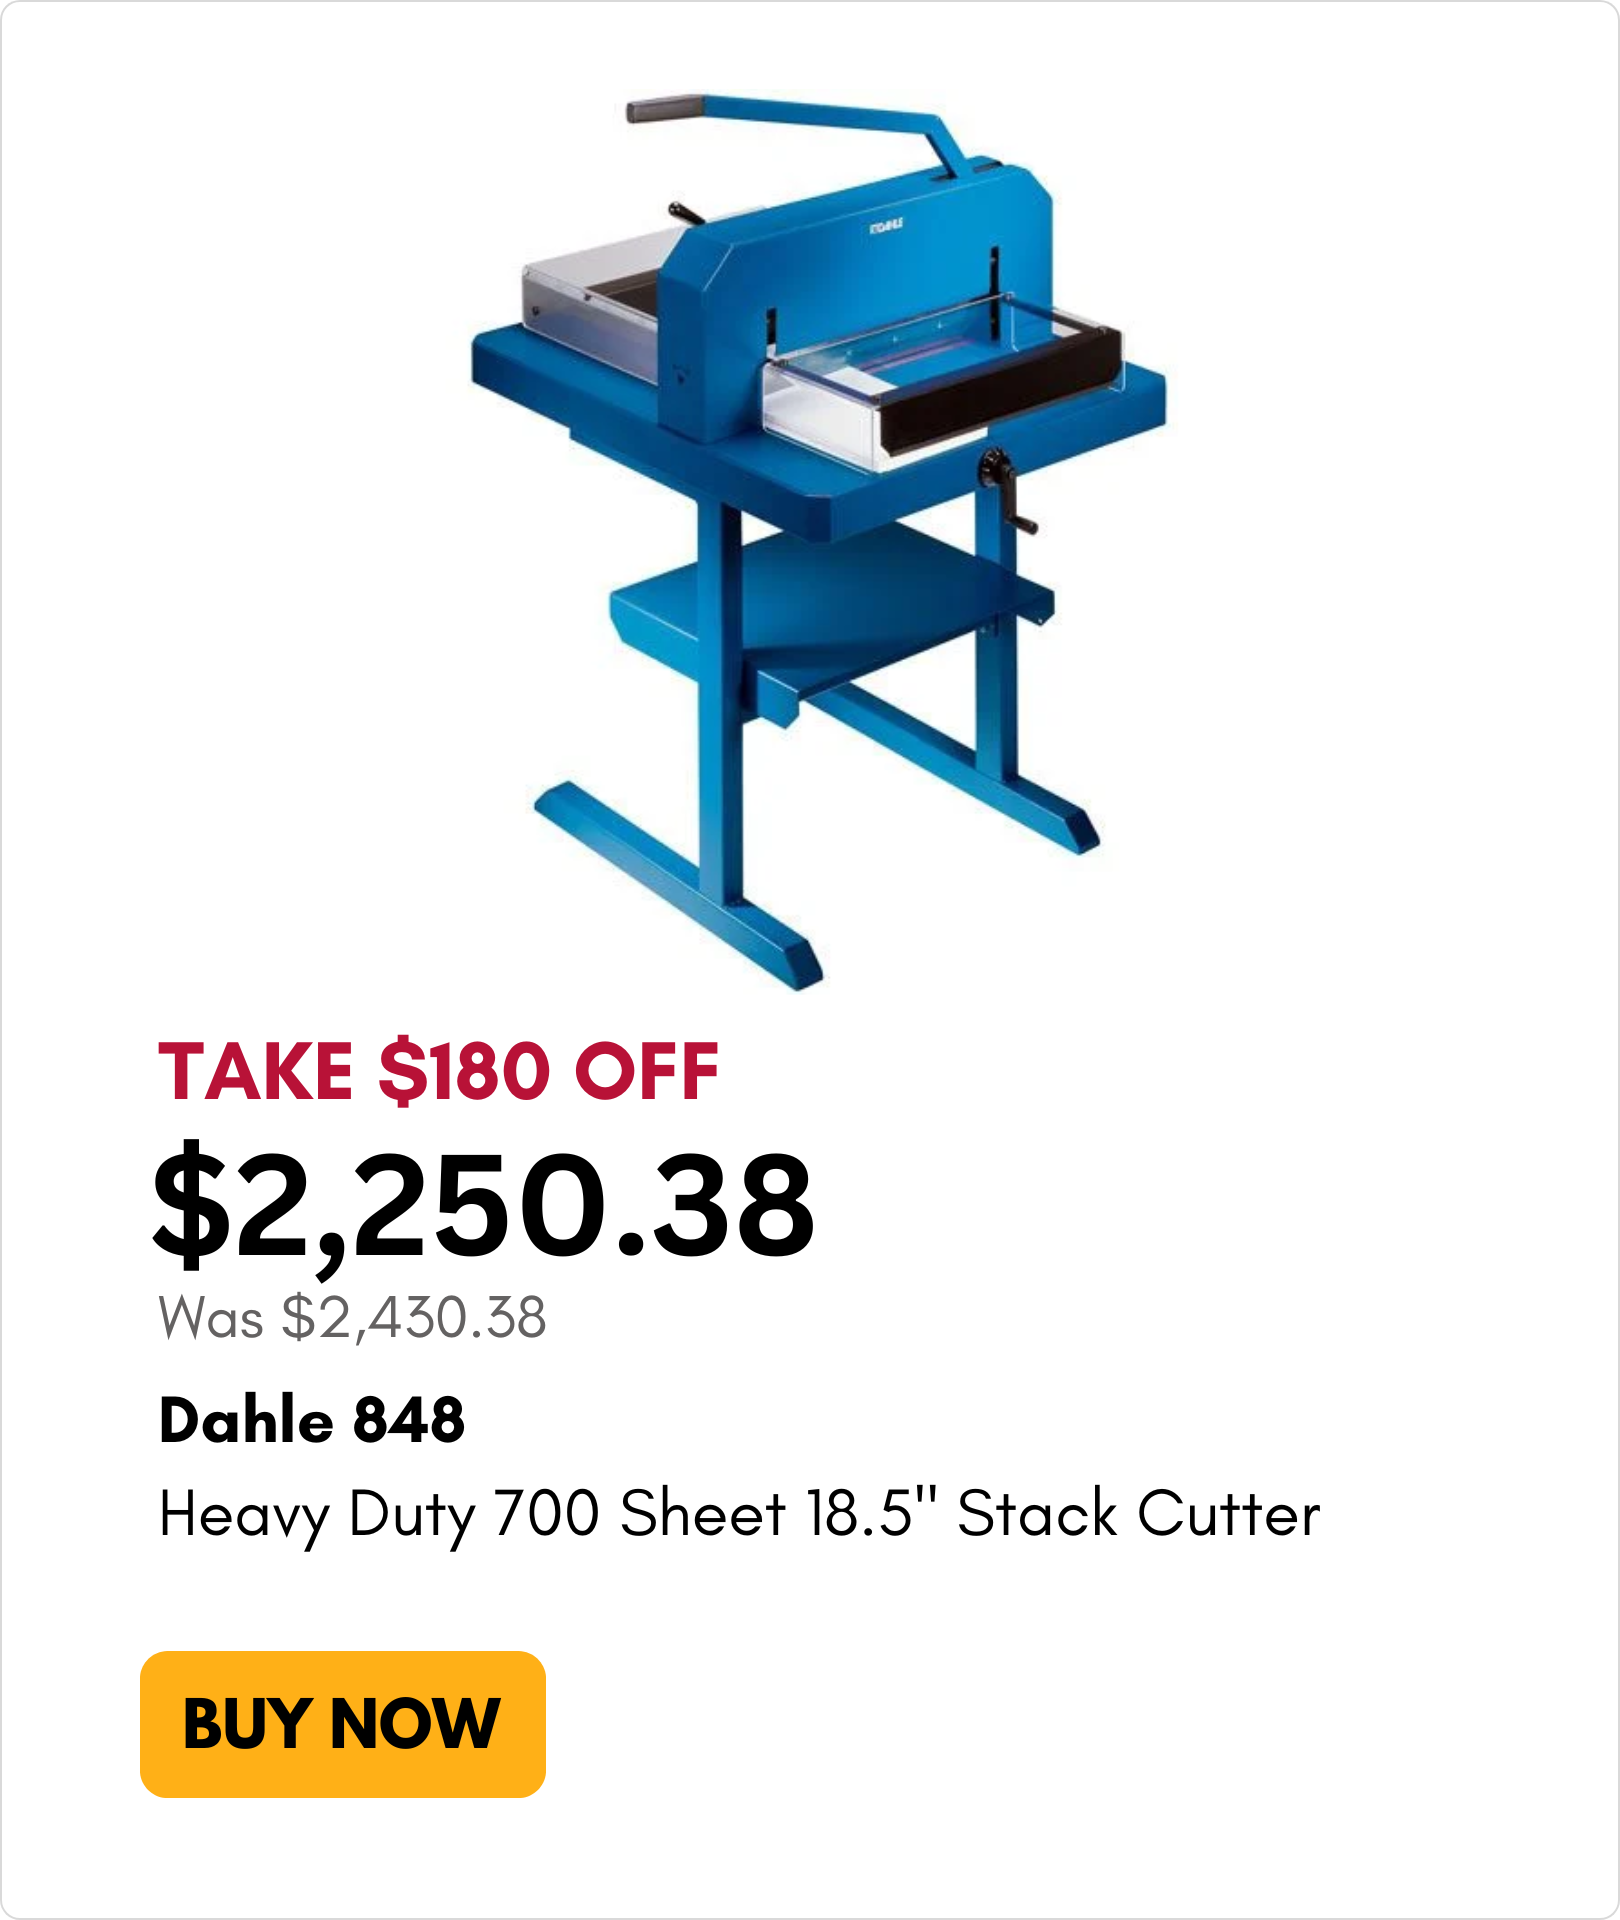 Dahle 848 Heavy Duty 700 Sheet 18.5-inch Stack Cutter on sale for $180 off on MyBinding.com